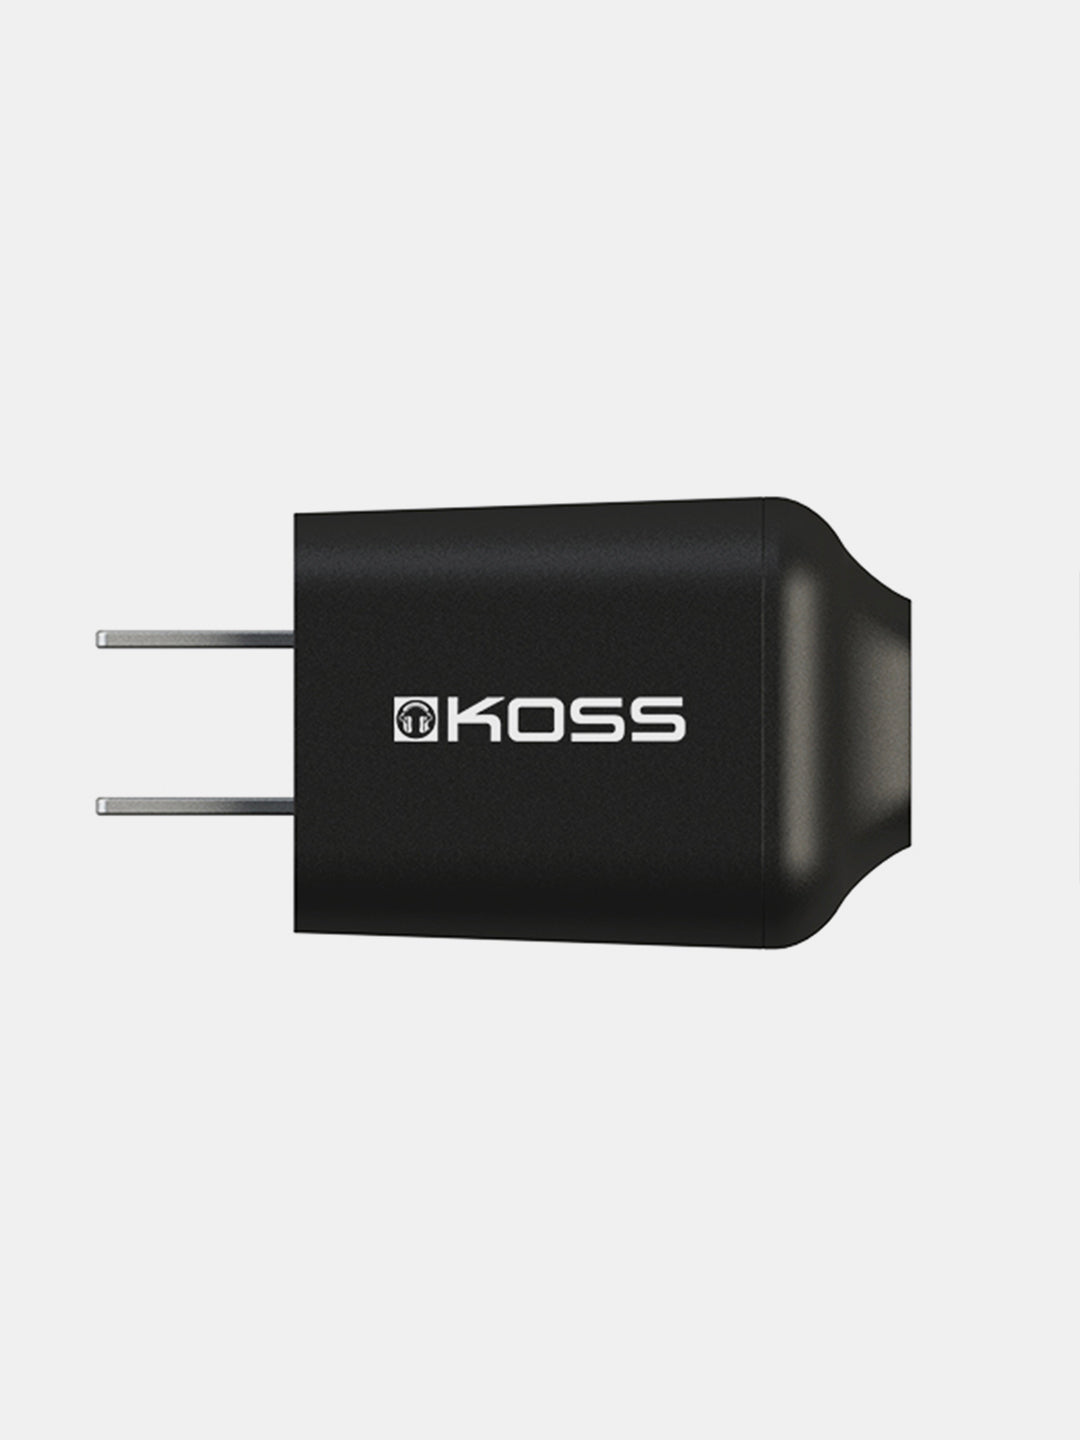 Utility Series USB-C Cord Adapter - Koss Stereophones